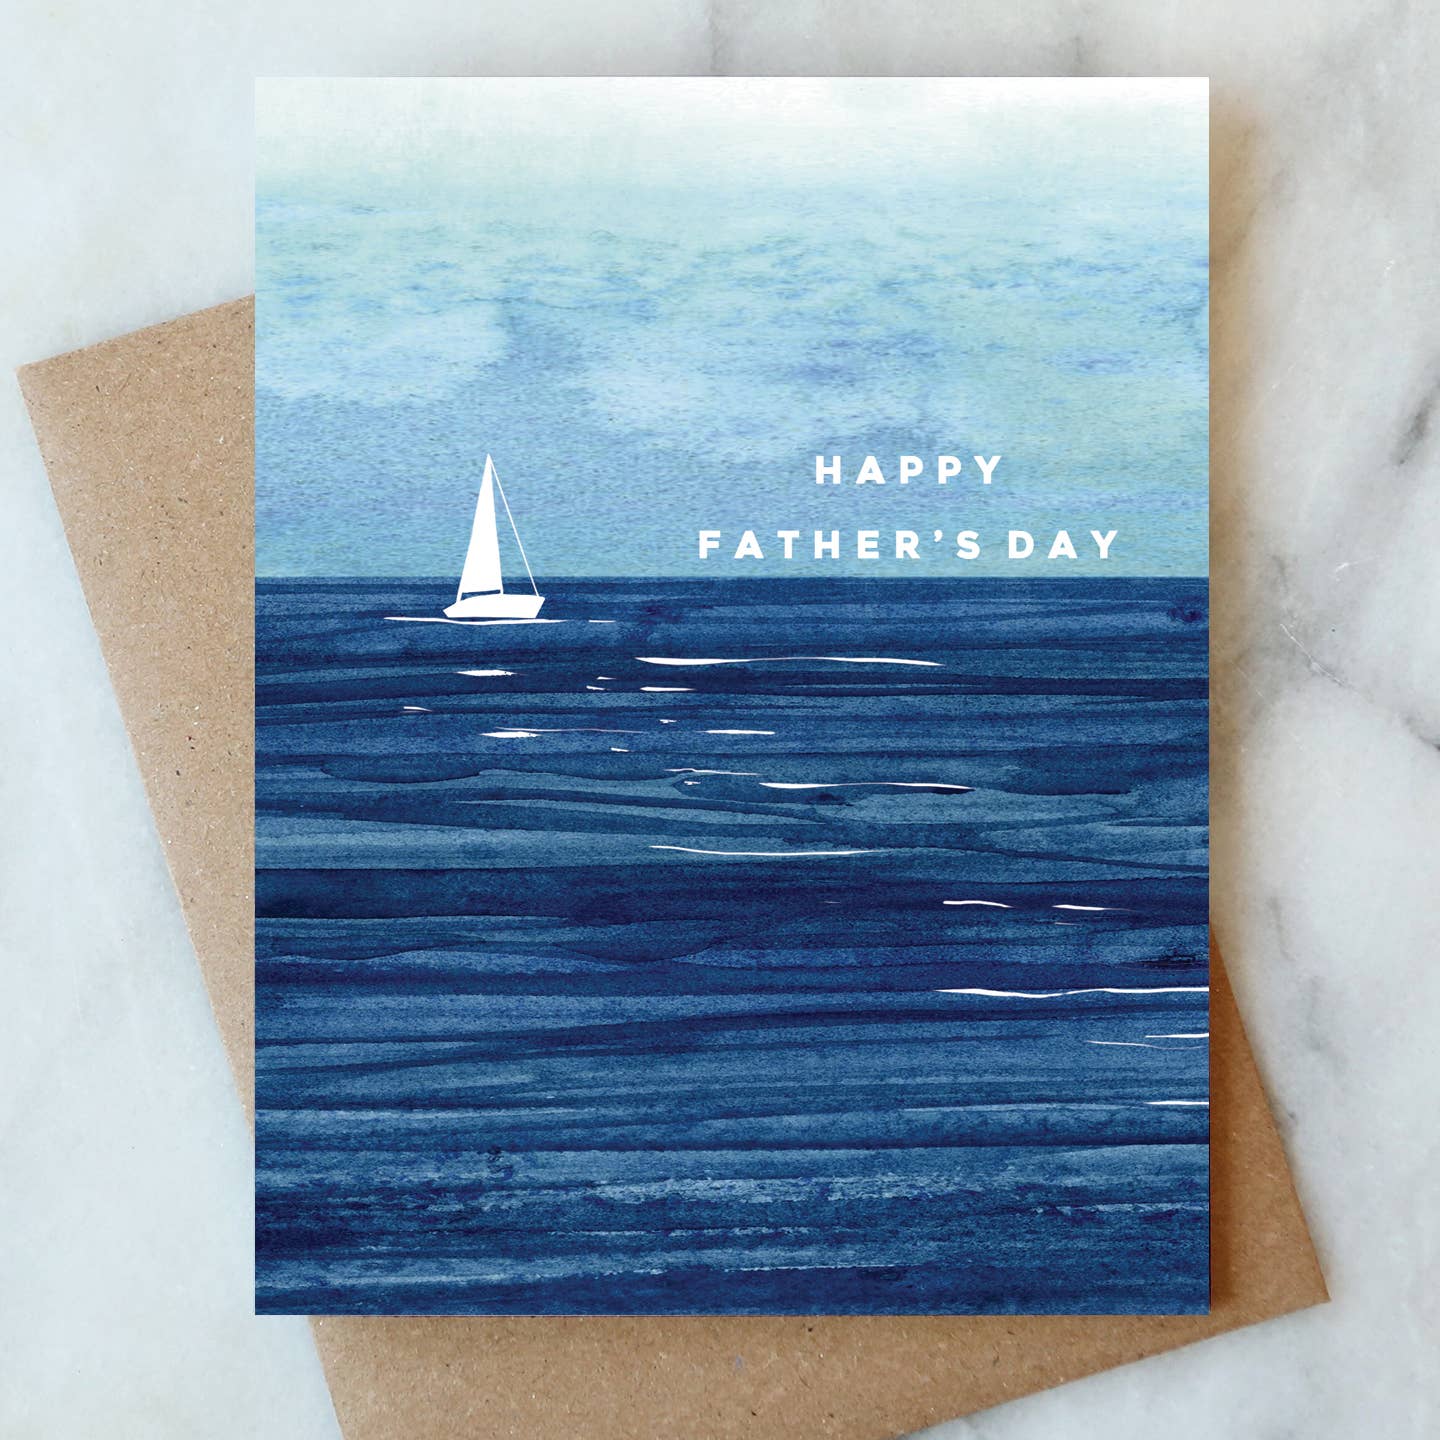 Happy Father's Day card with a sailboat on water image